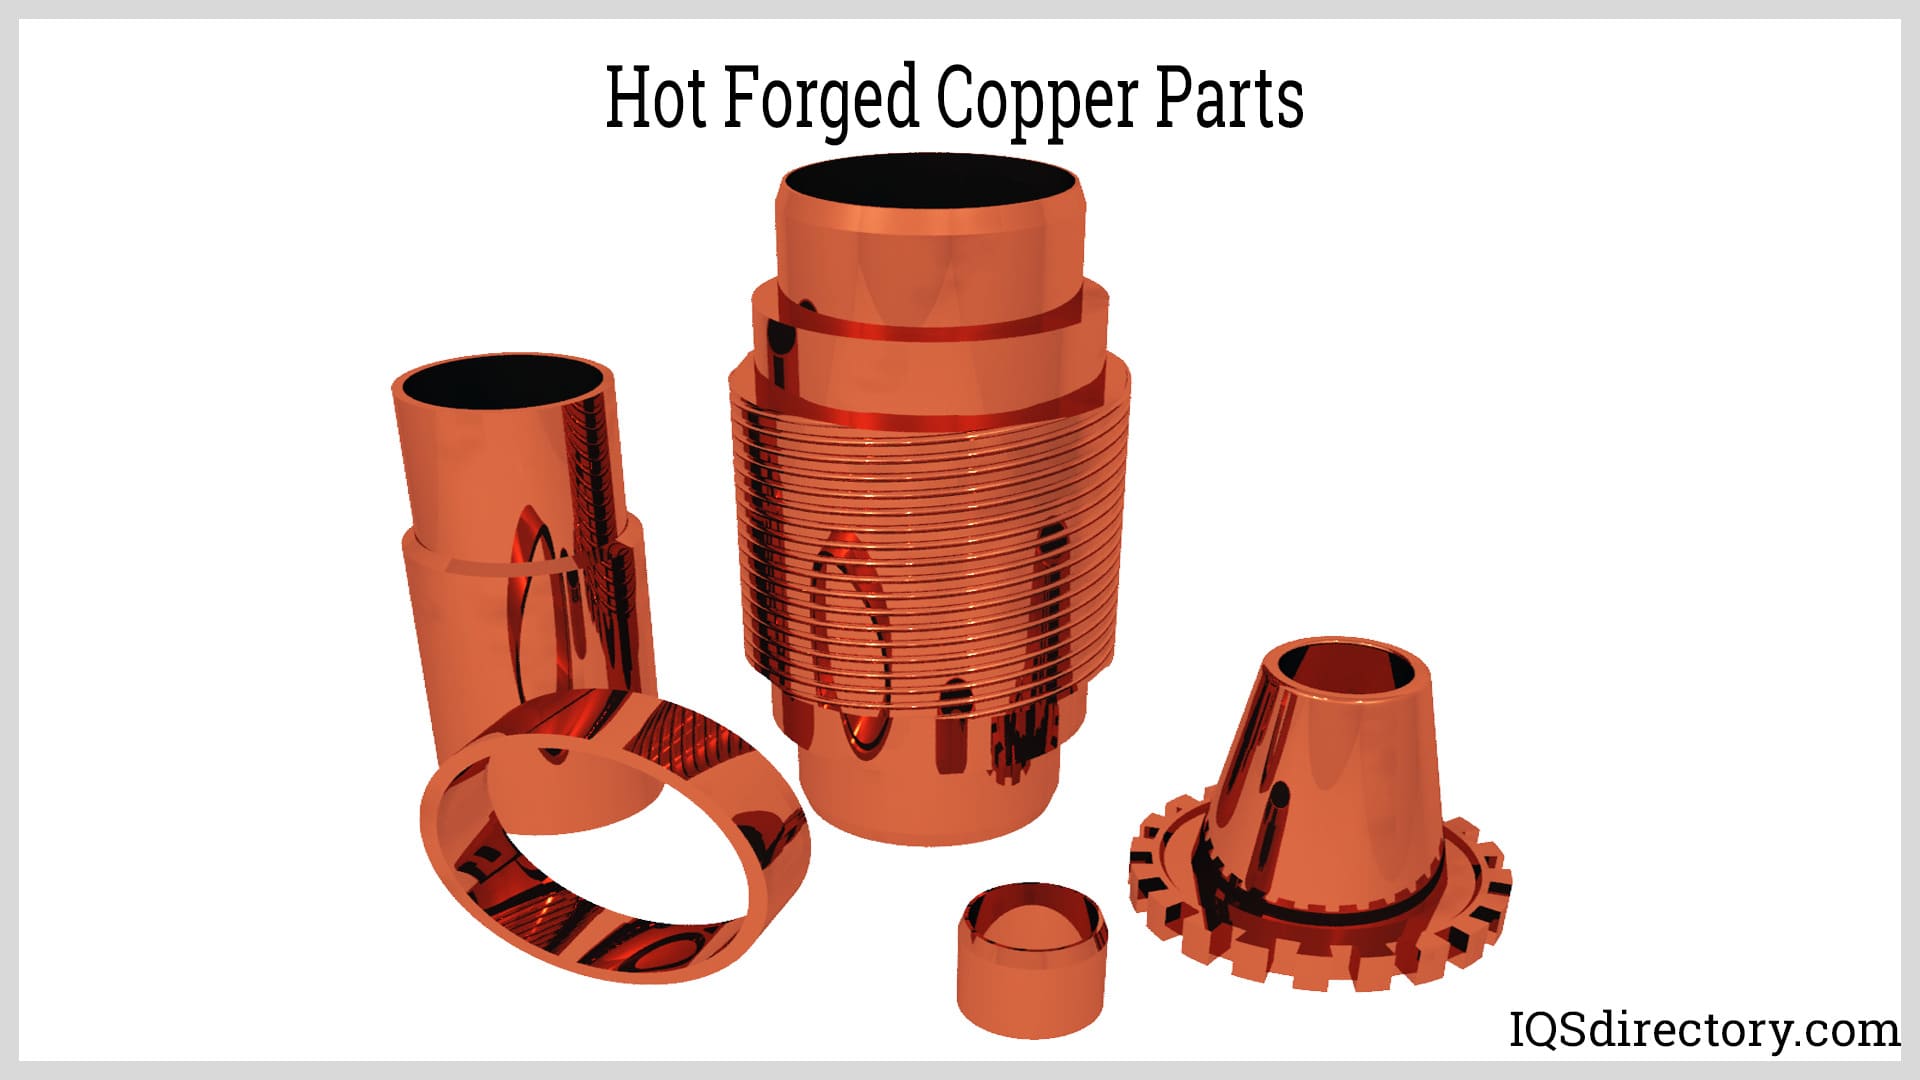 Hot Forged Copper Parts